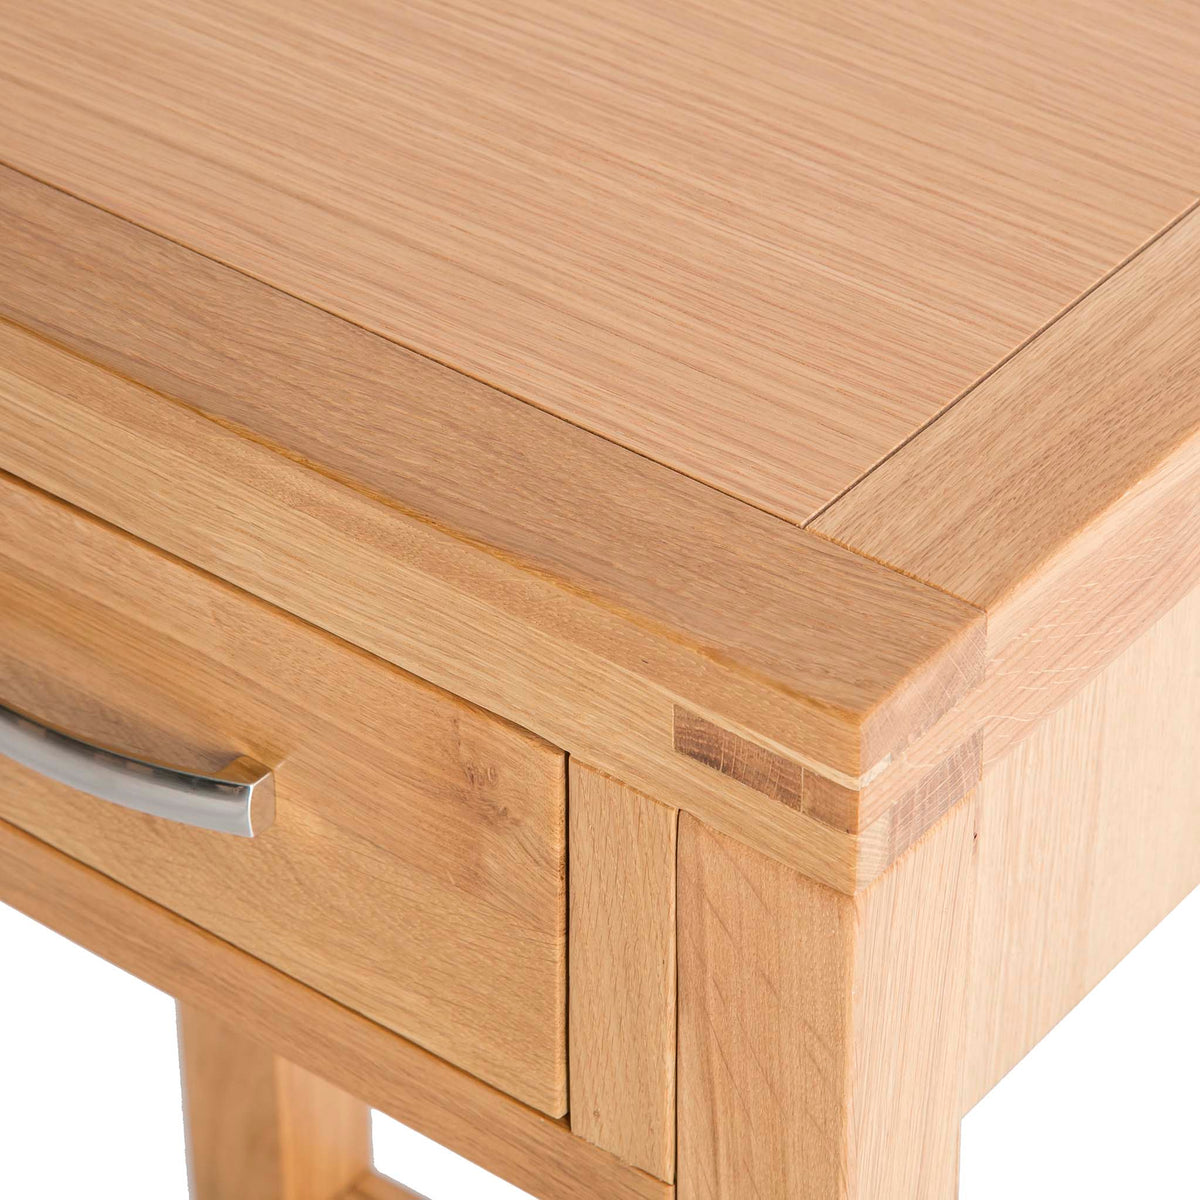 Abbey Light Oak Telephone Hall Table - Close up of drawer and corner